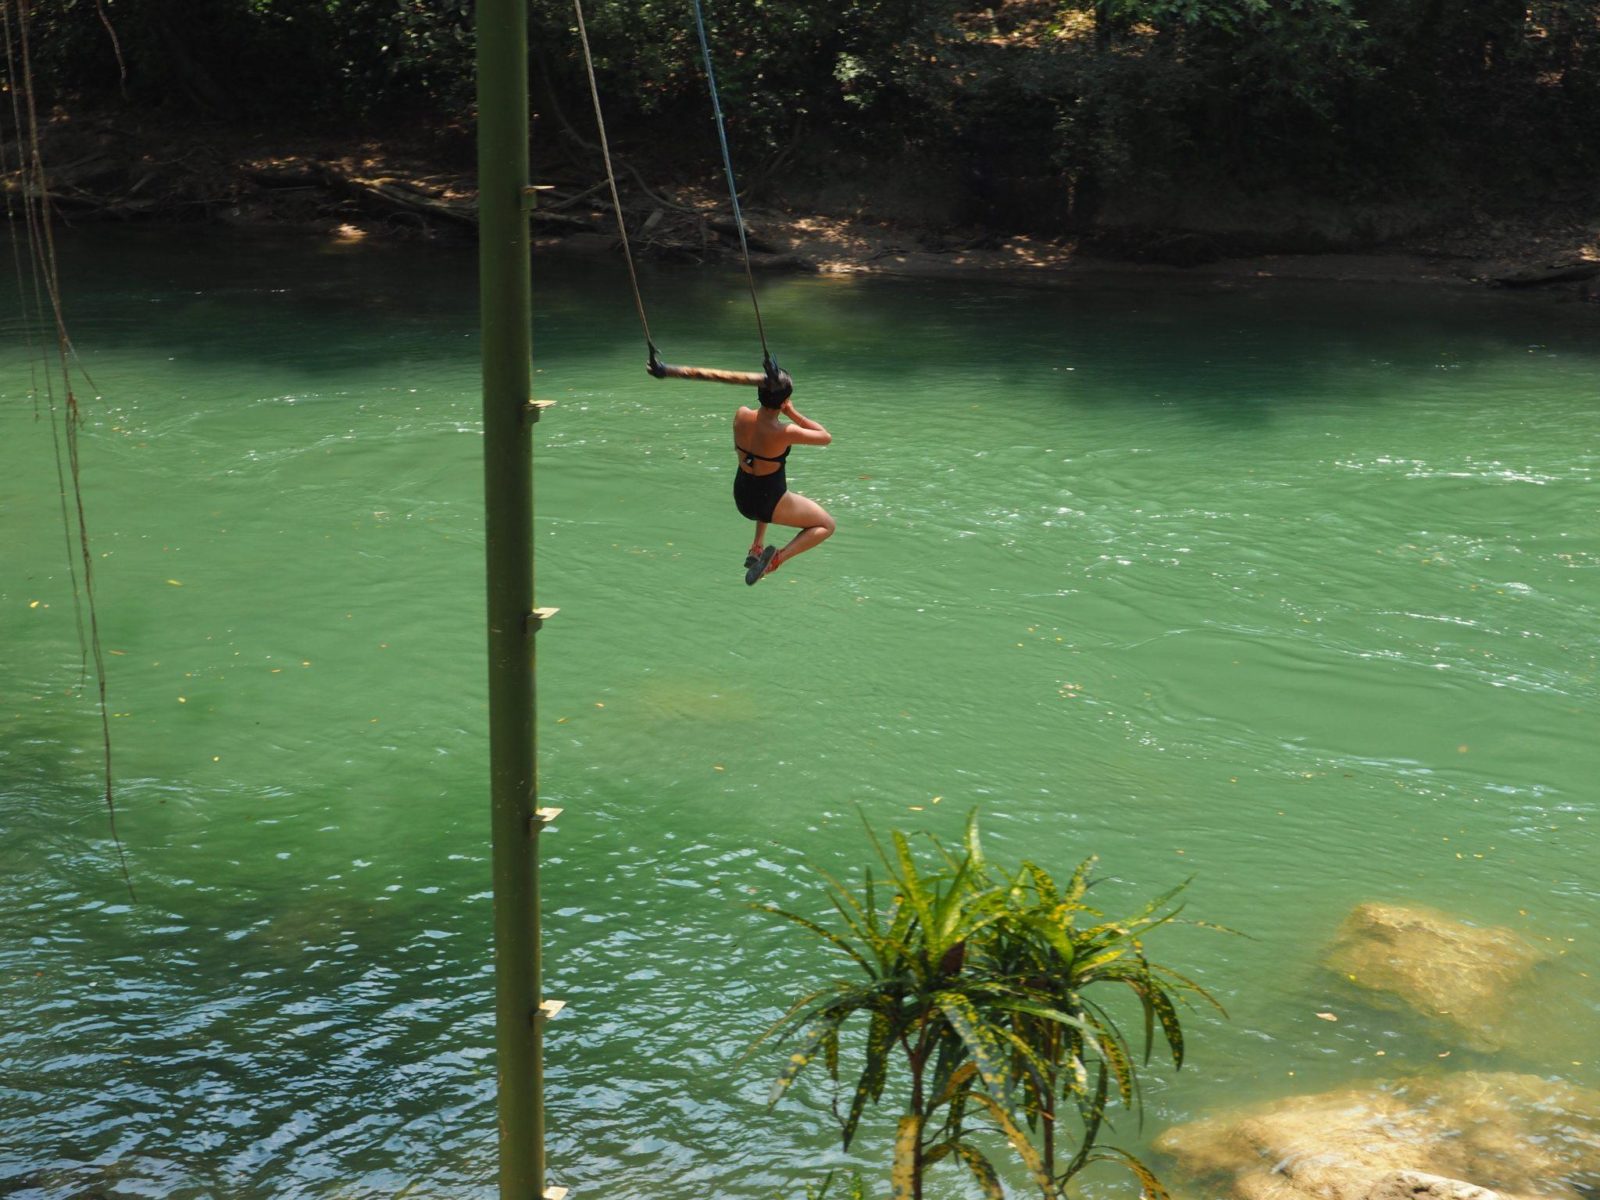 The Ultimate Guide to Visiting Semuc Champey